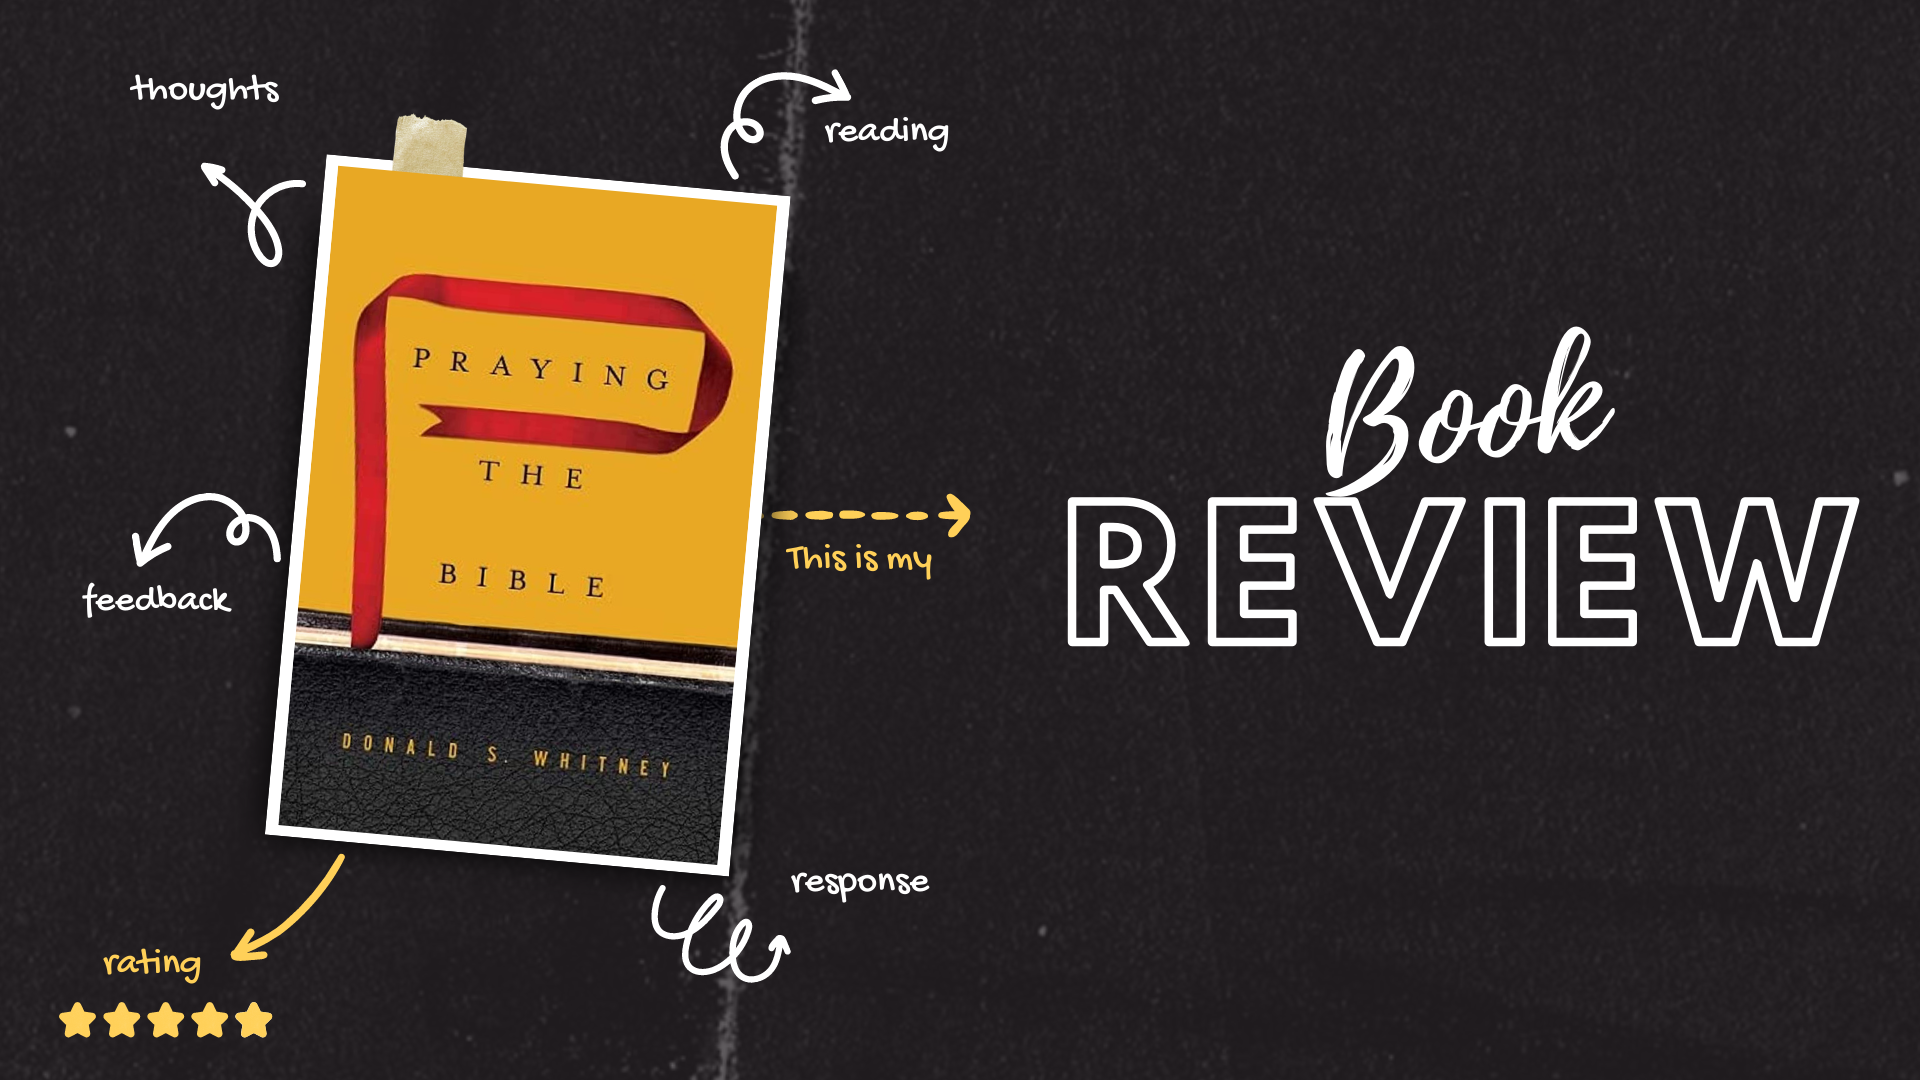 Book Review – Praying the Bible